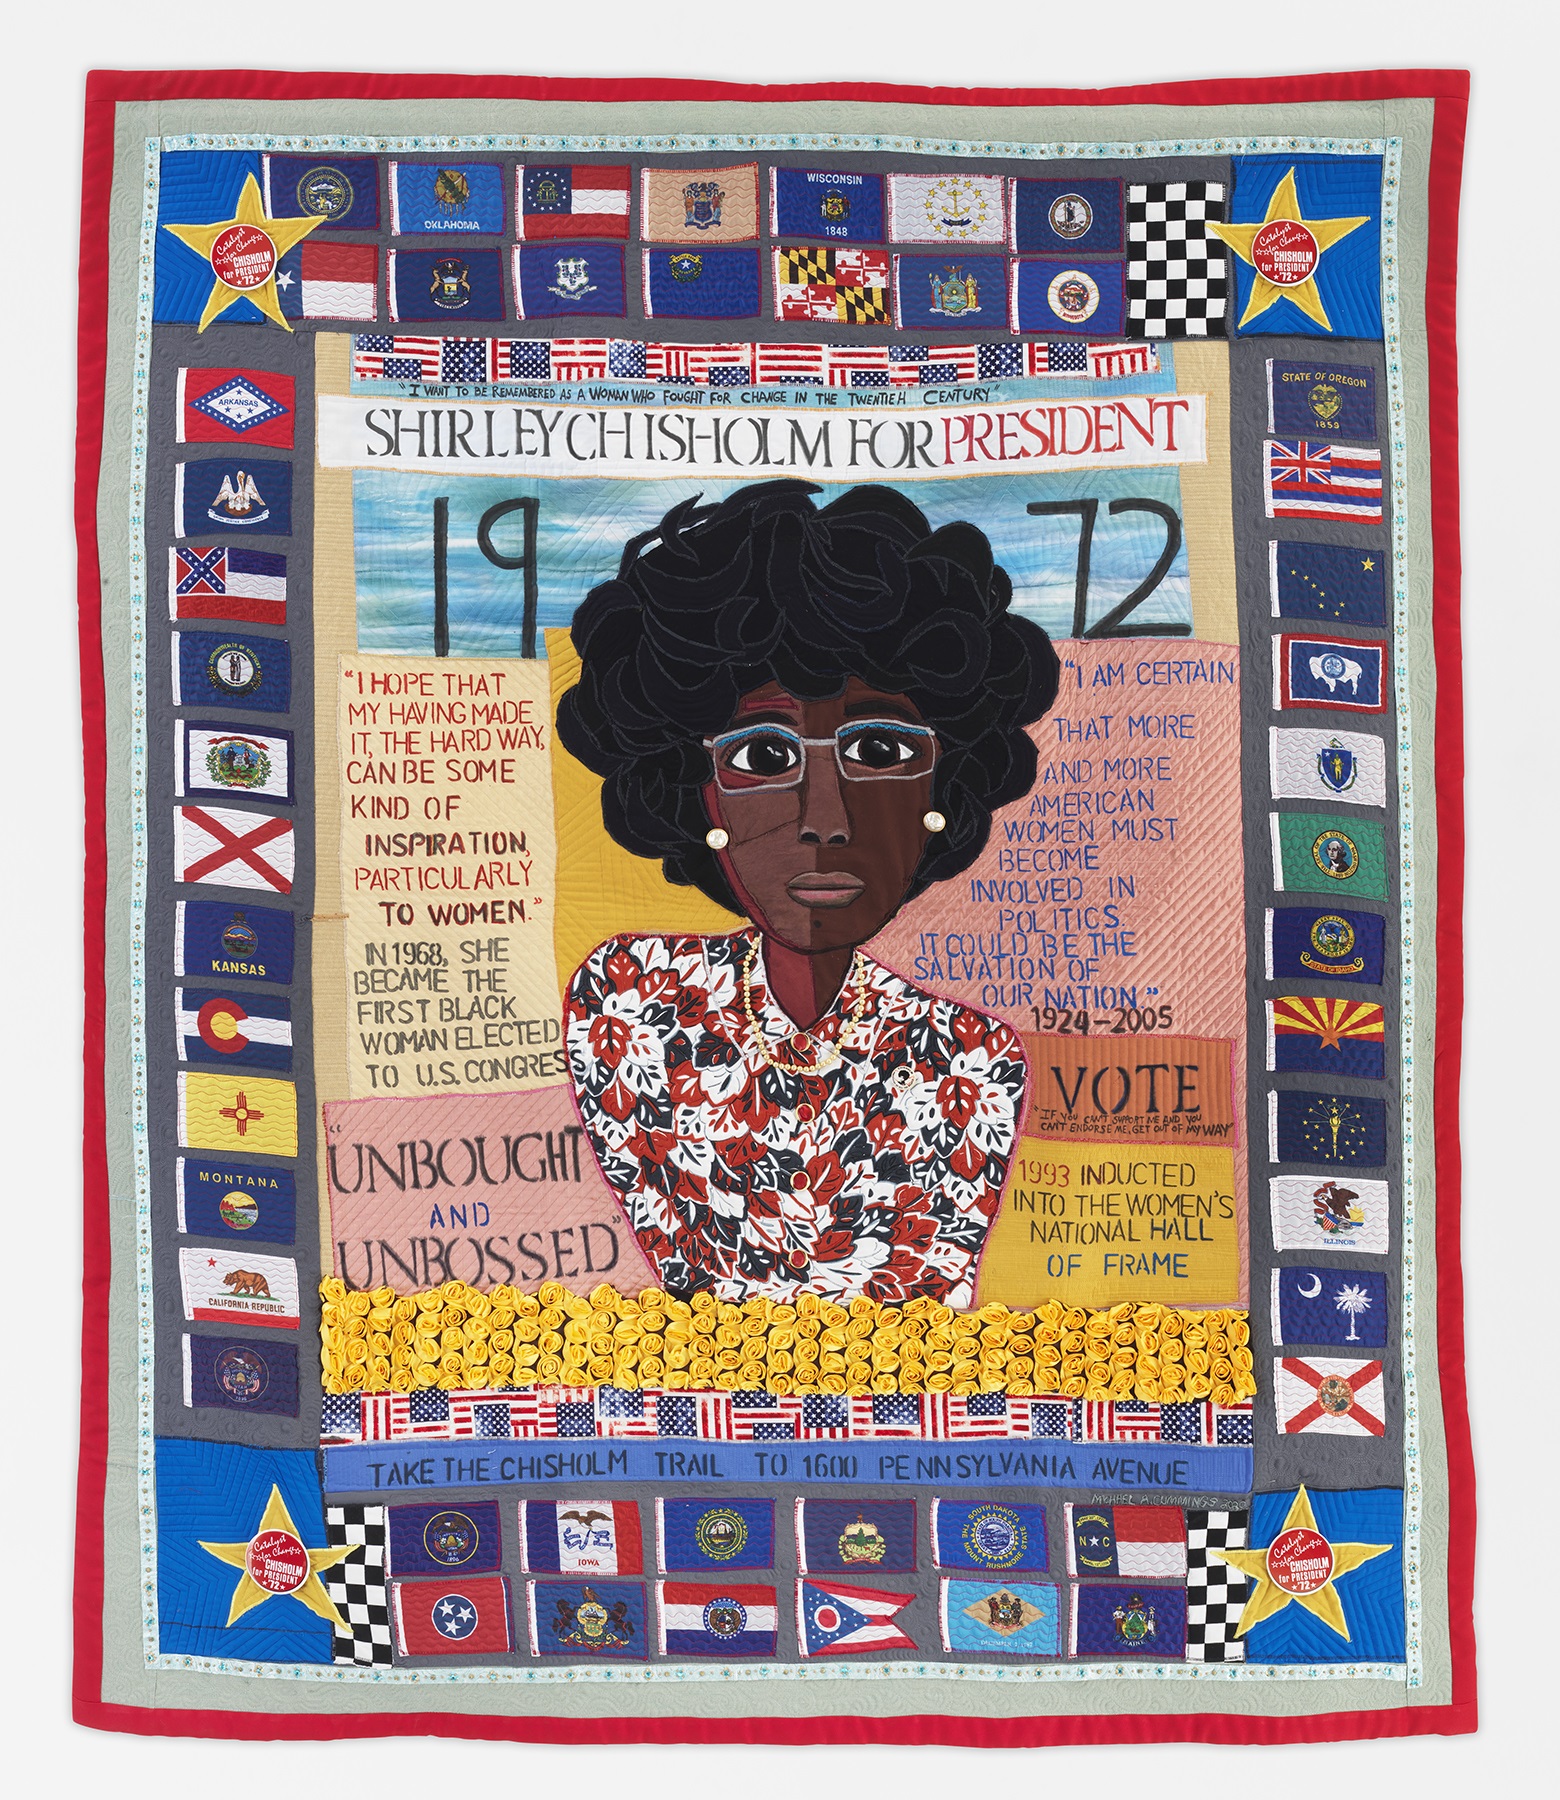 Shirley Chisholm Quilt with text about her political acheivements